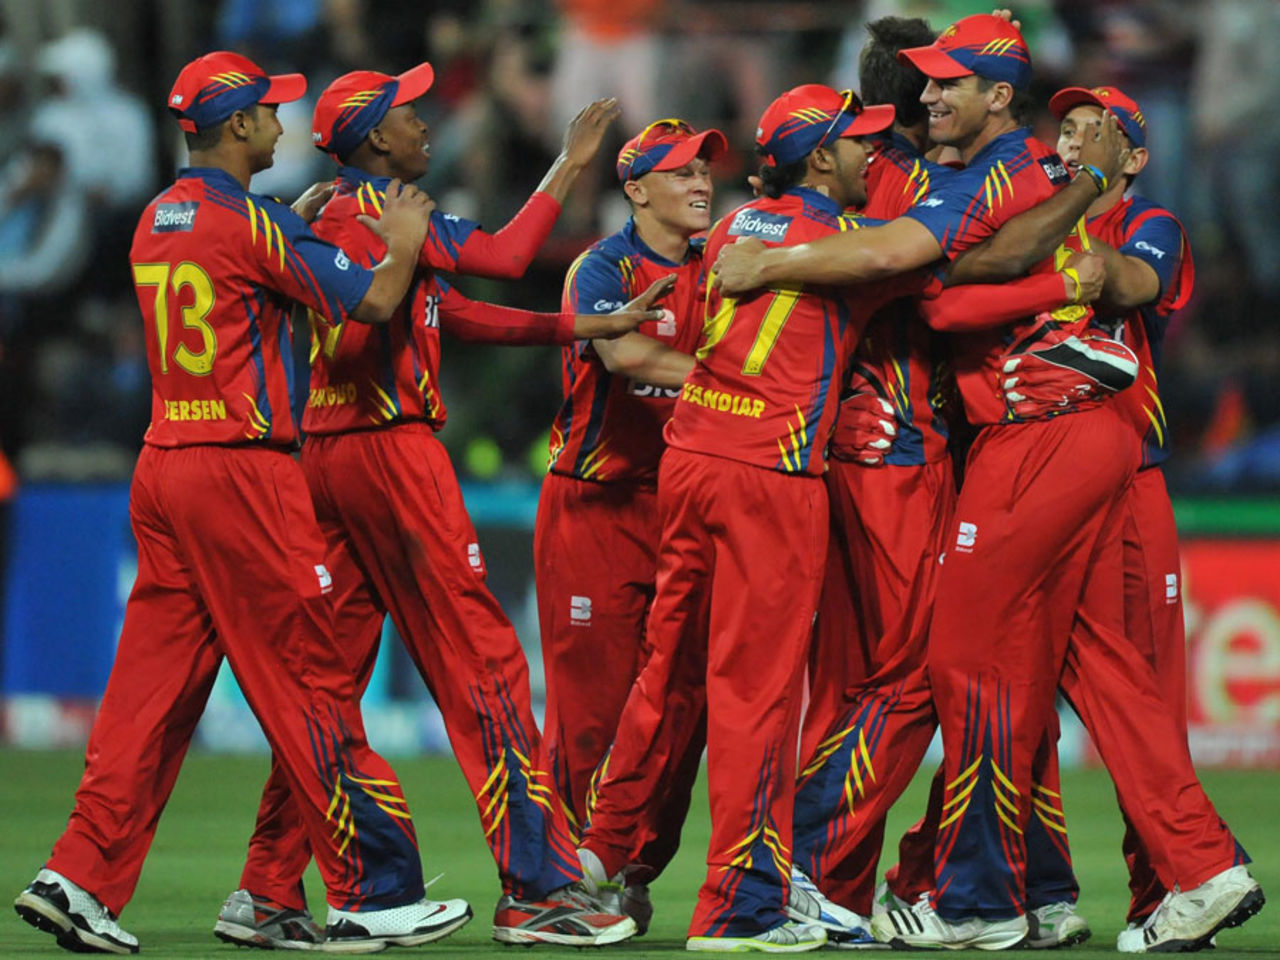 Lions celebrate the run-out of Robin Uthappa, Lions v Bangalore, CLT20 2010, Johannesburg